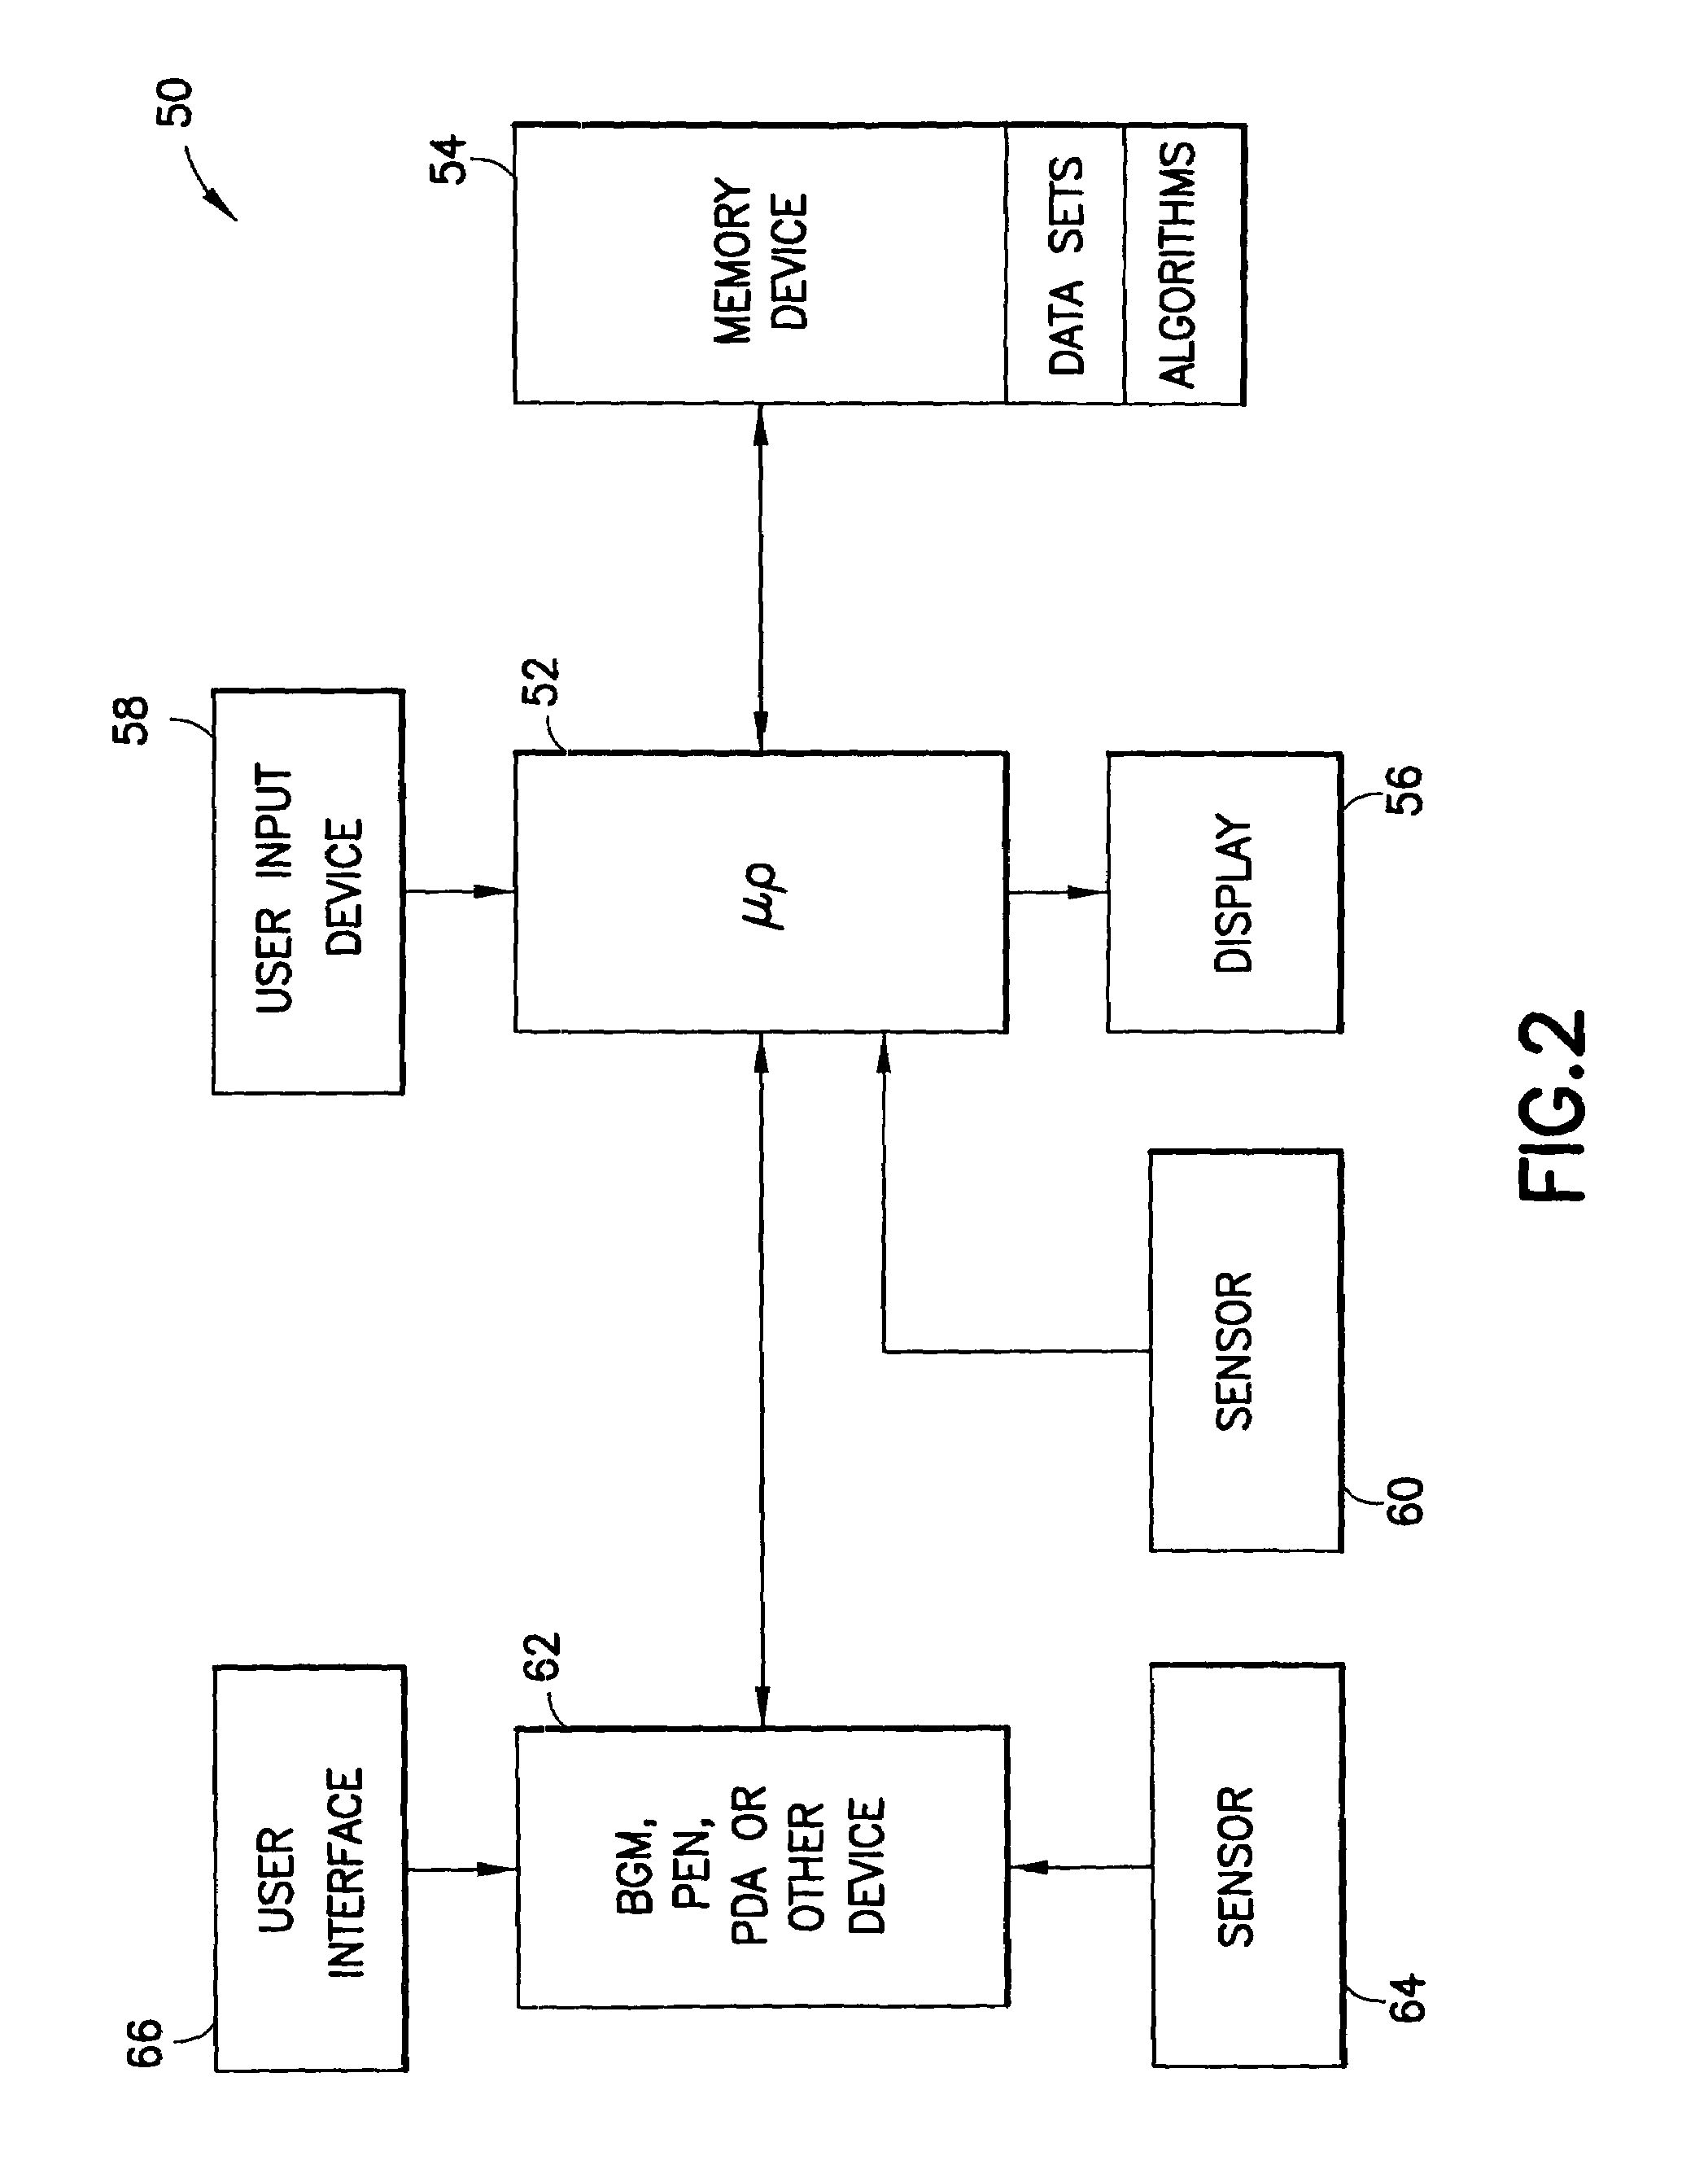 System for determining insulin dose using carbohydrate to insulin ratio and insulin sensitivity factor